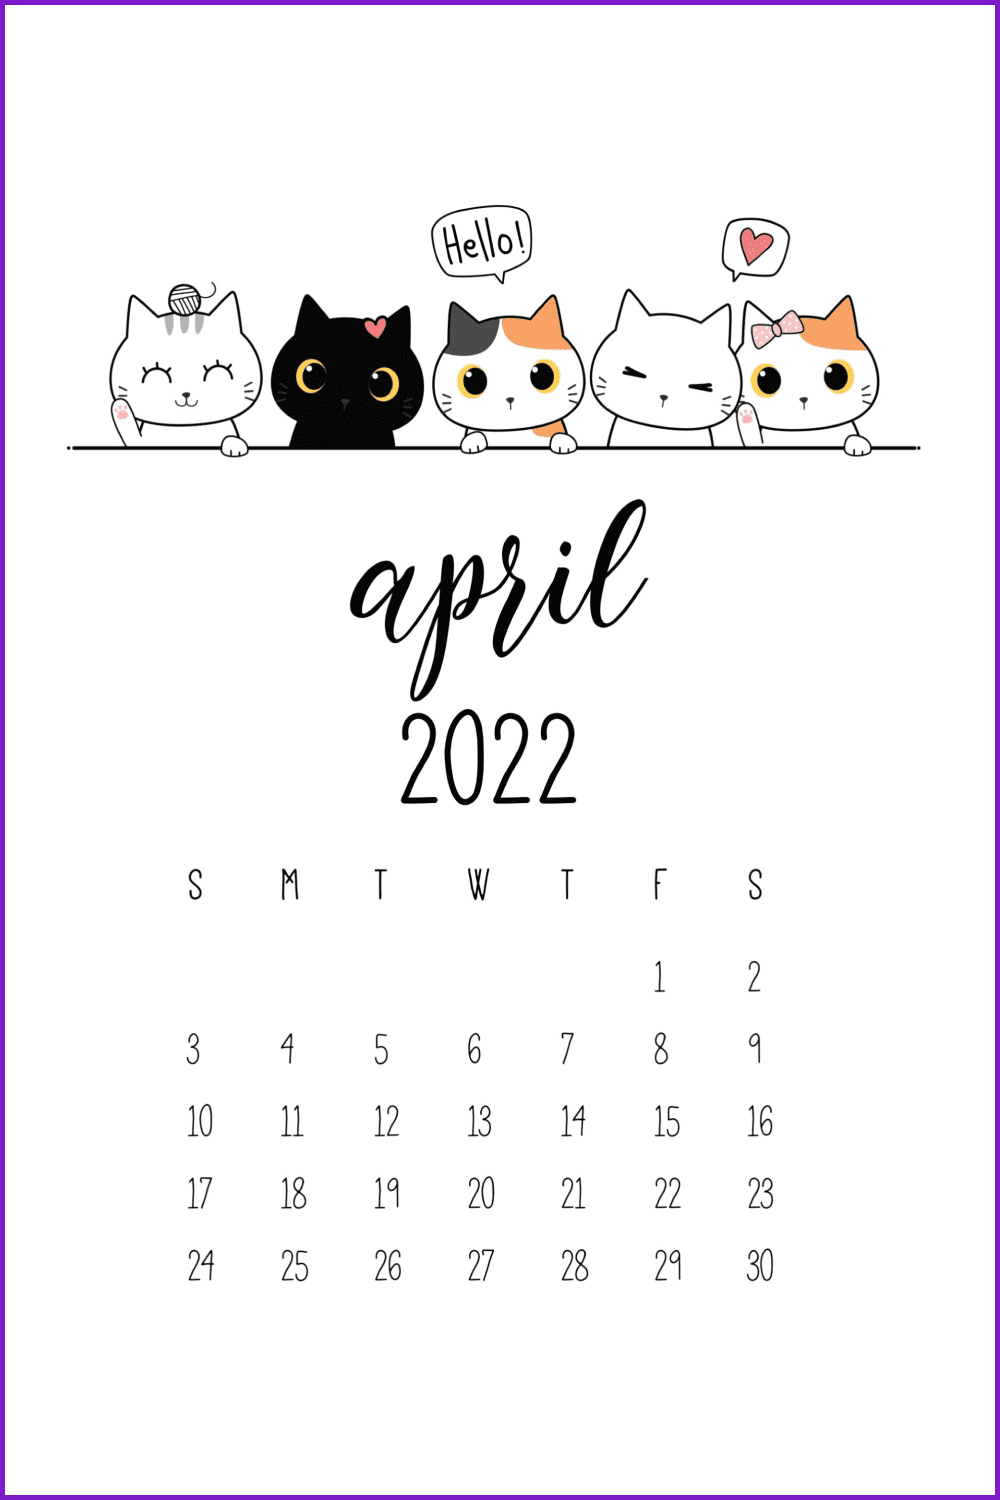 Calendar with a few funny kittens.